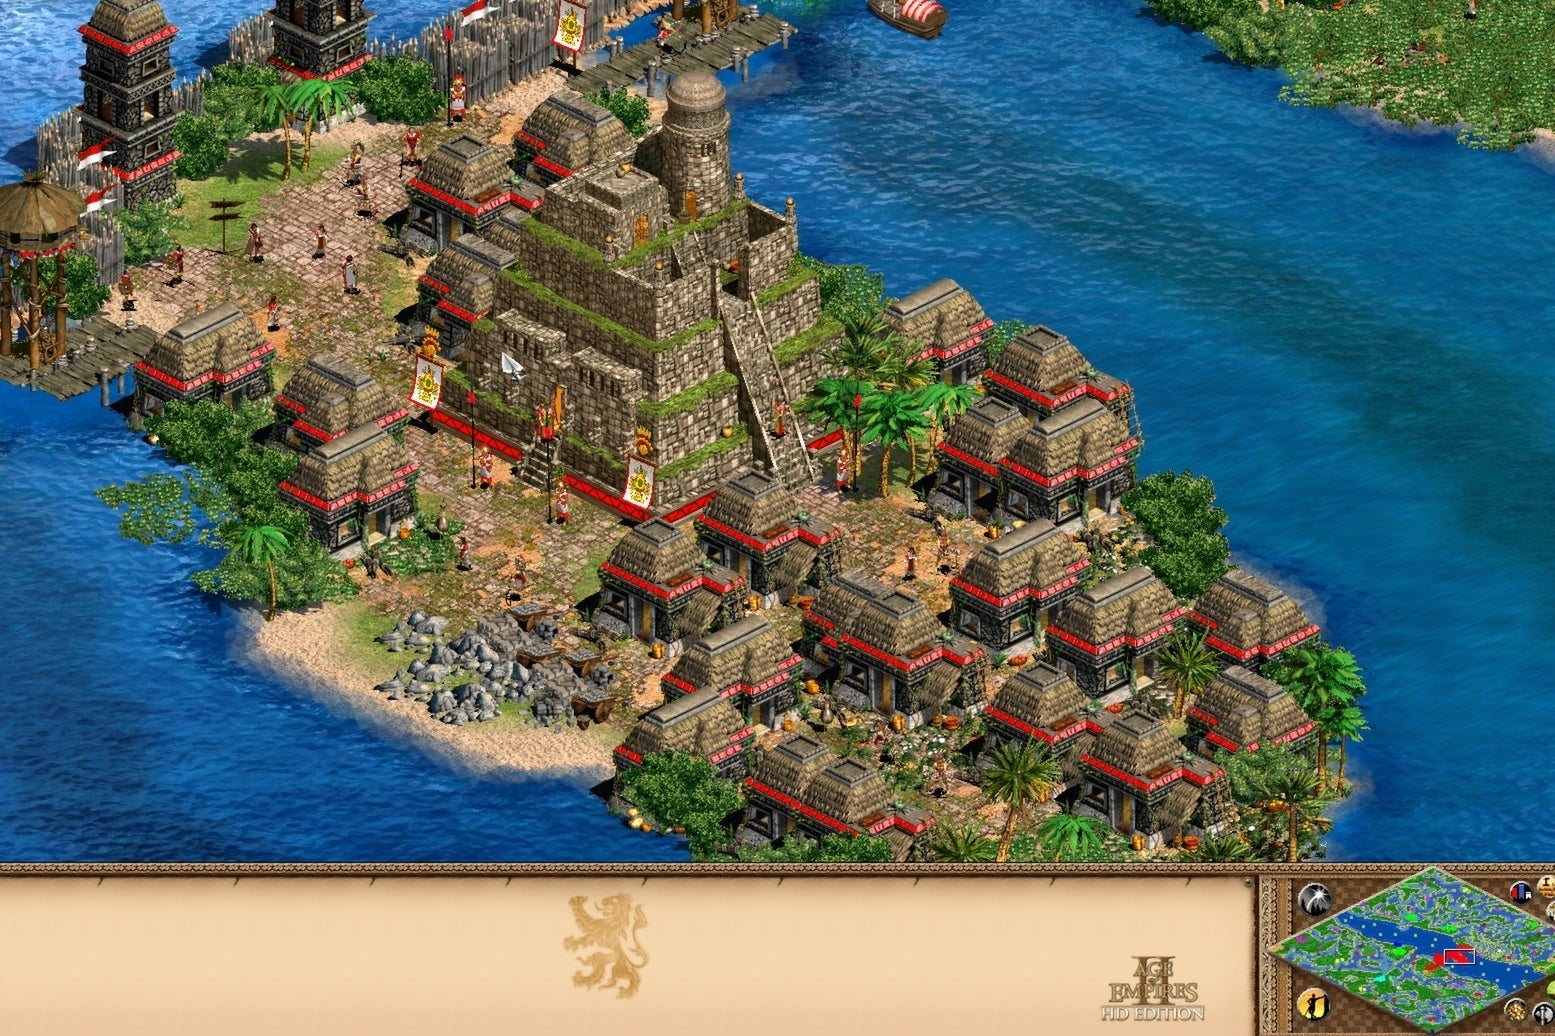 Image for Age of Empires 2 gets first official expansion in over 10 years